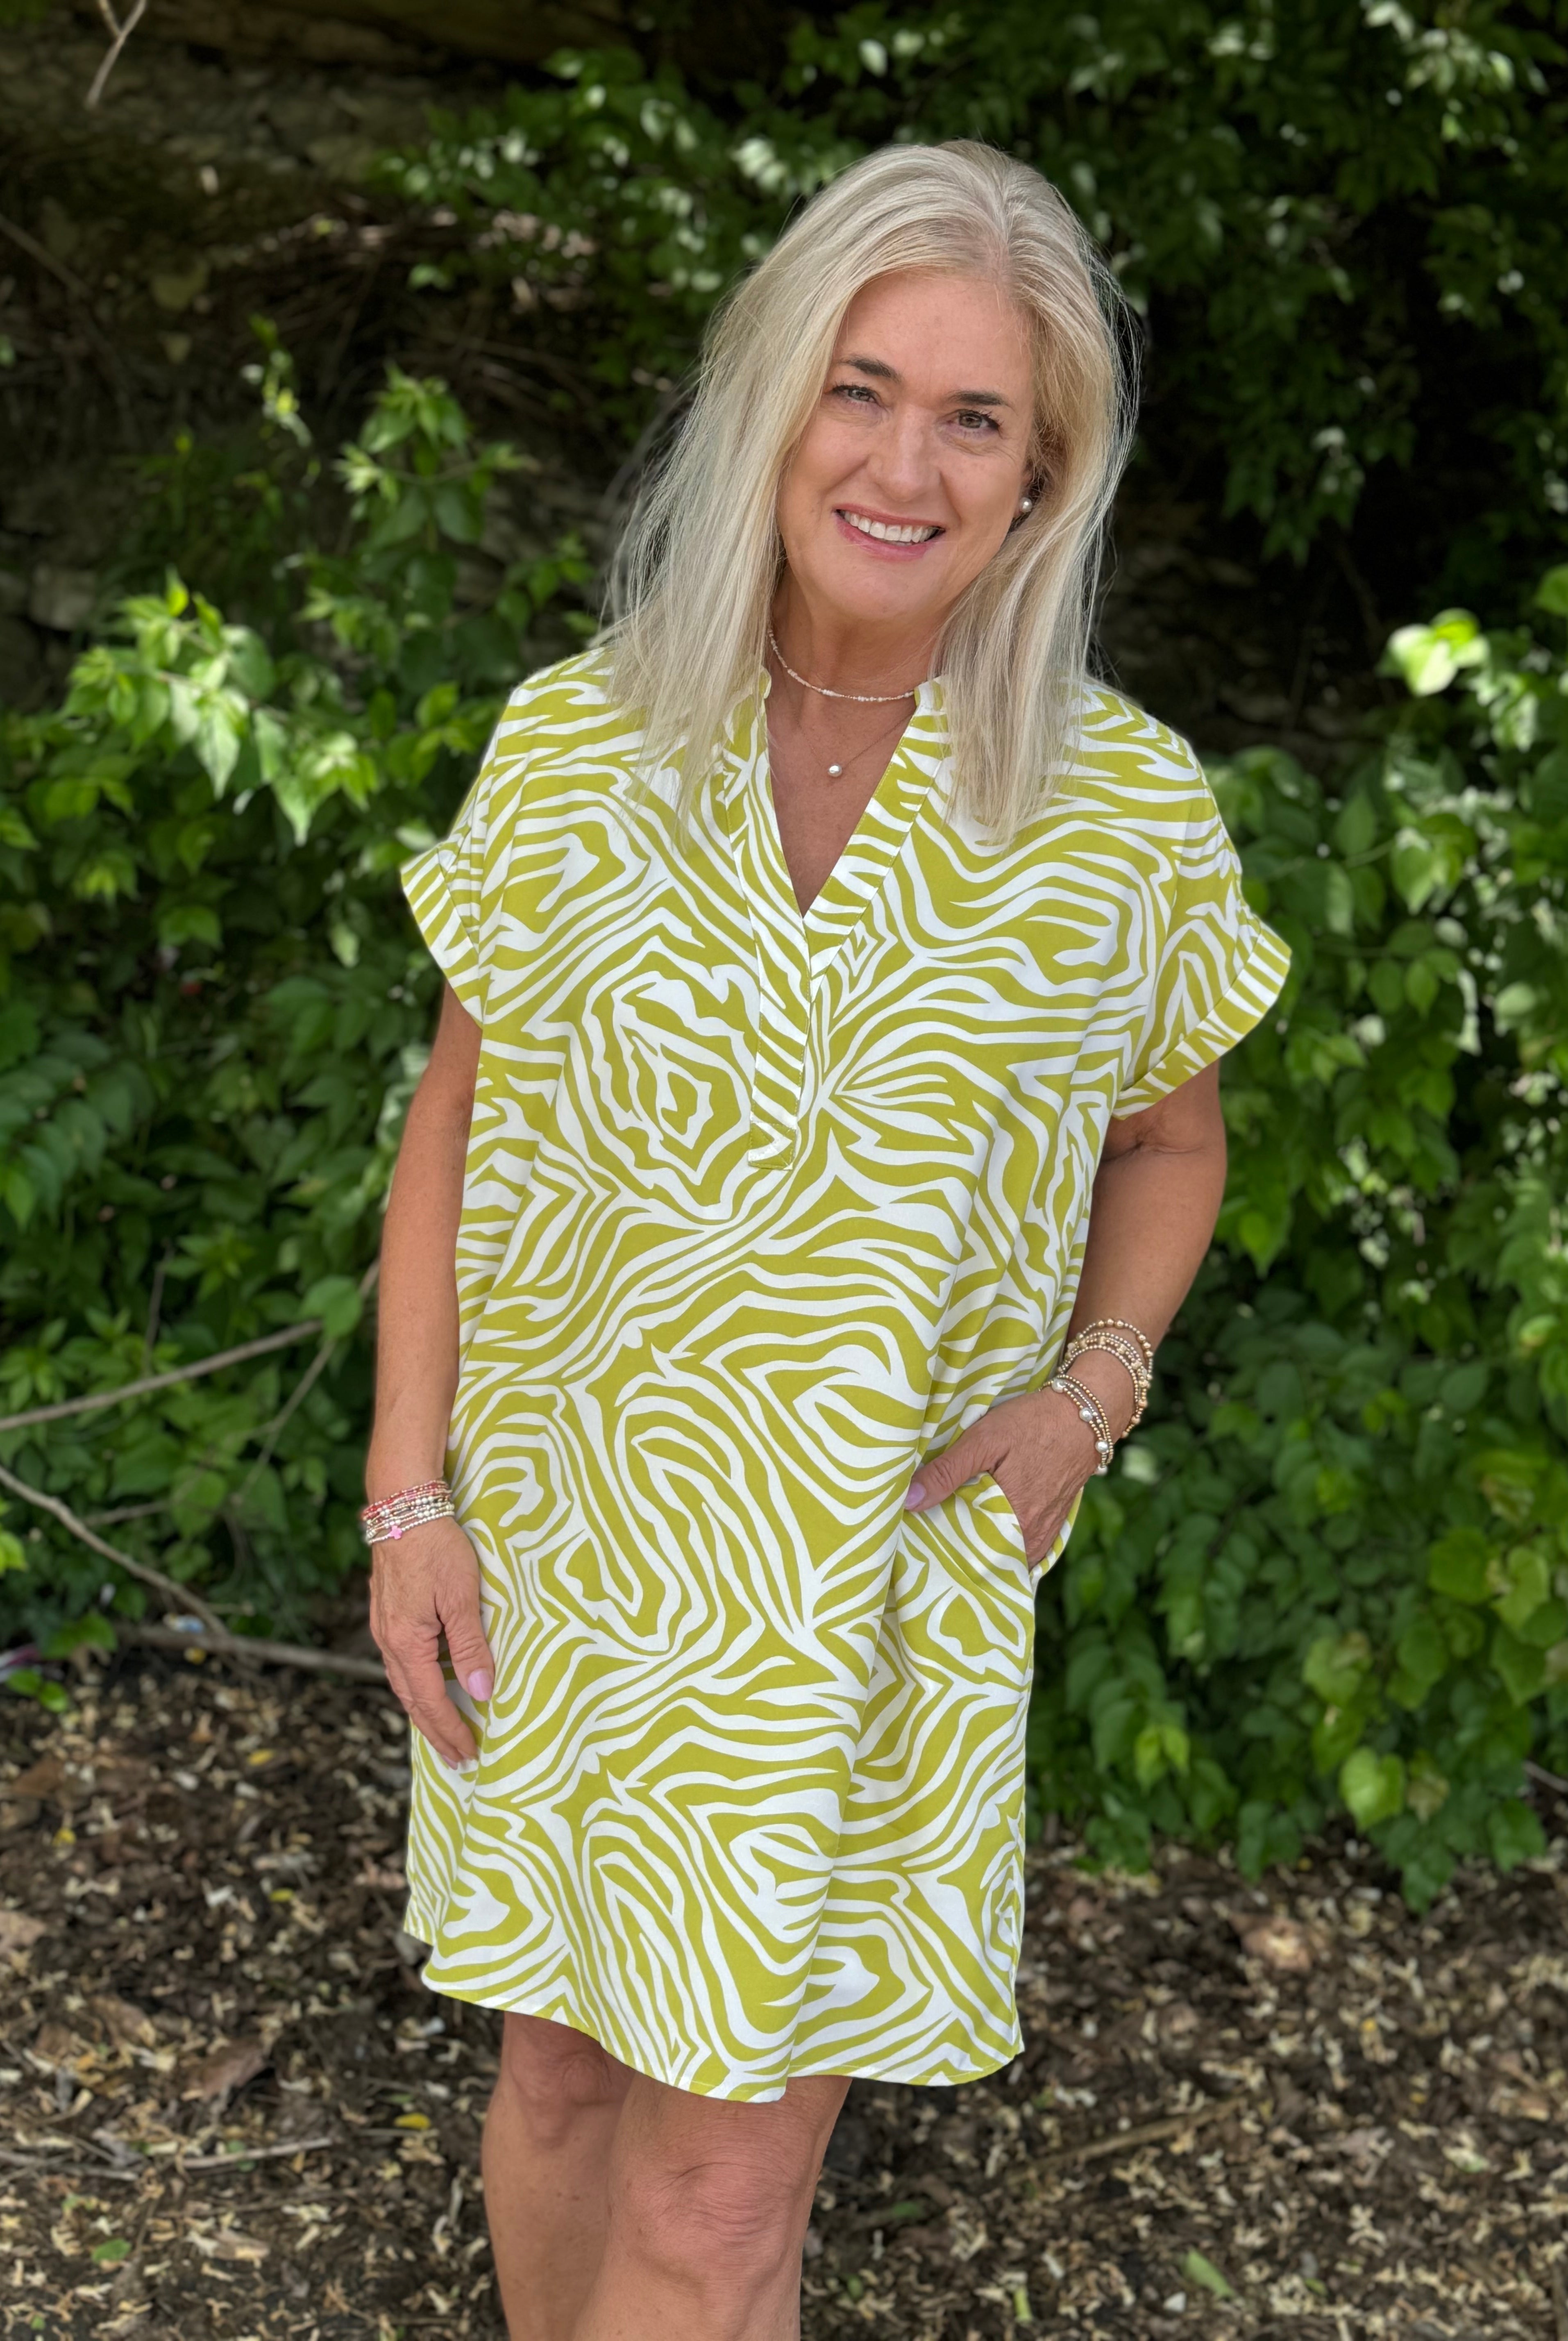 Wild About Summer Dress-180 Dresses-The Lovely Closet-The Lovely Closet, Women's Fashion Boutique in Alexandria, KY